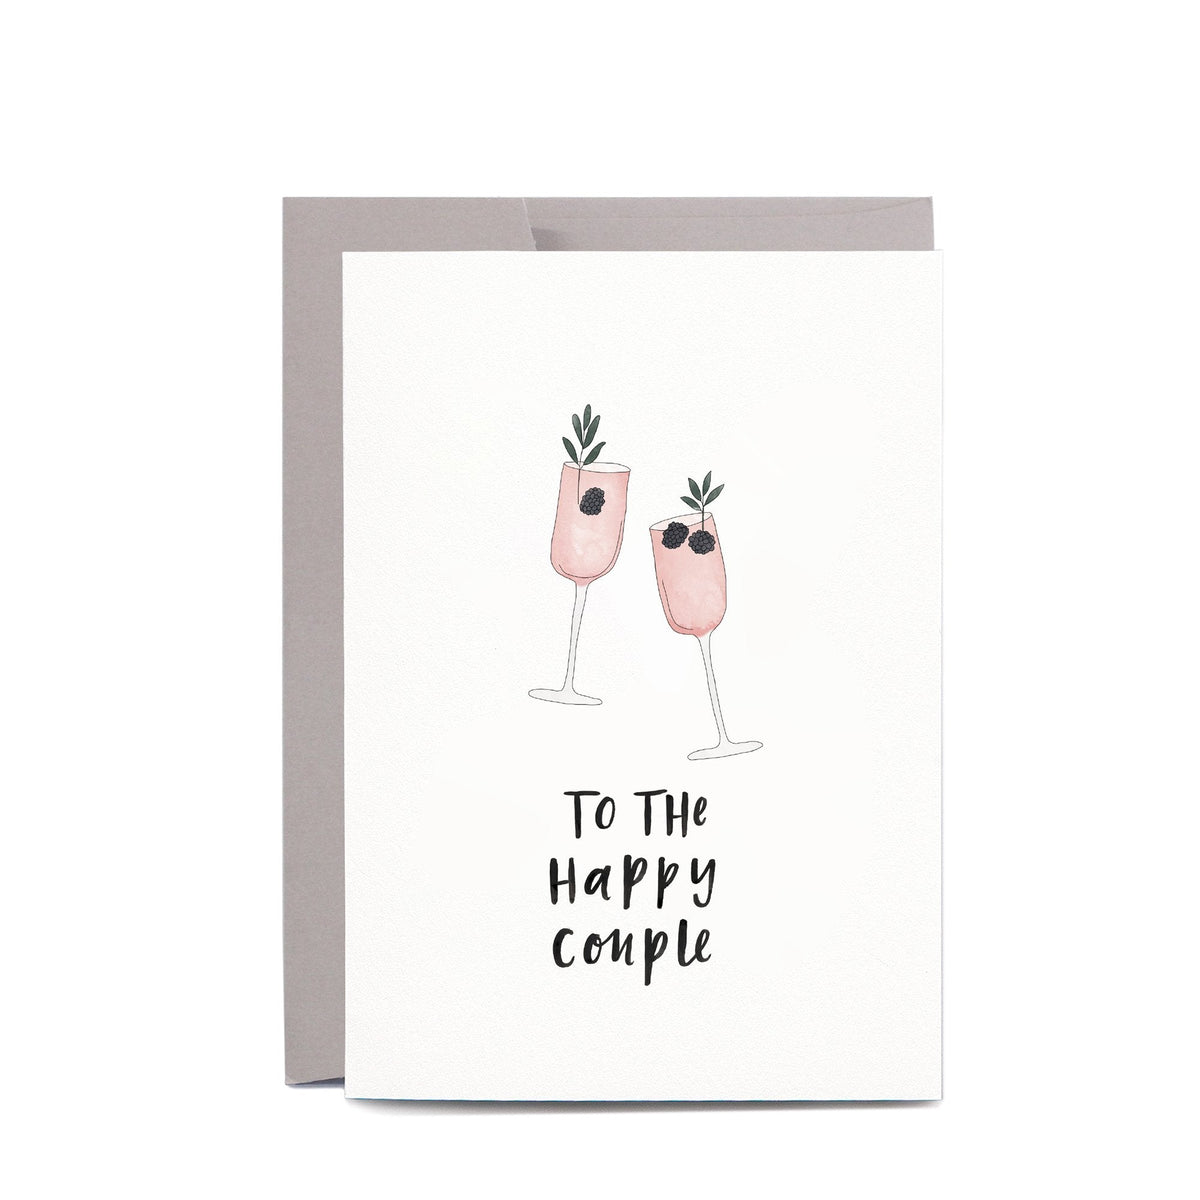 In the Daylight - Card - To The Happy Couple